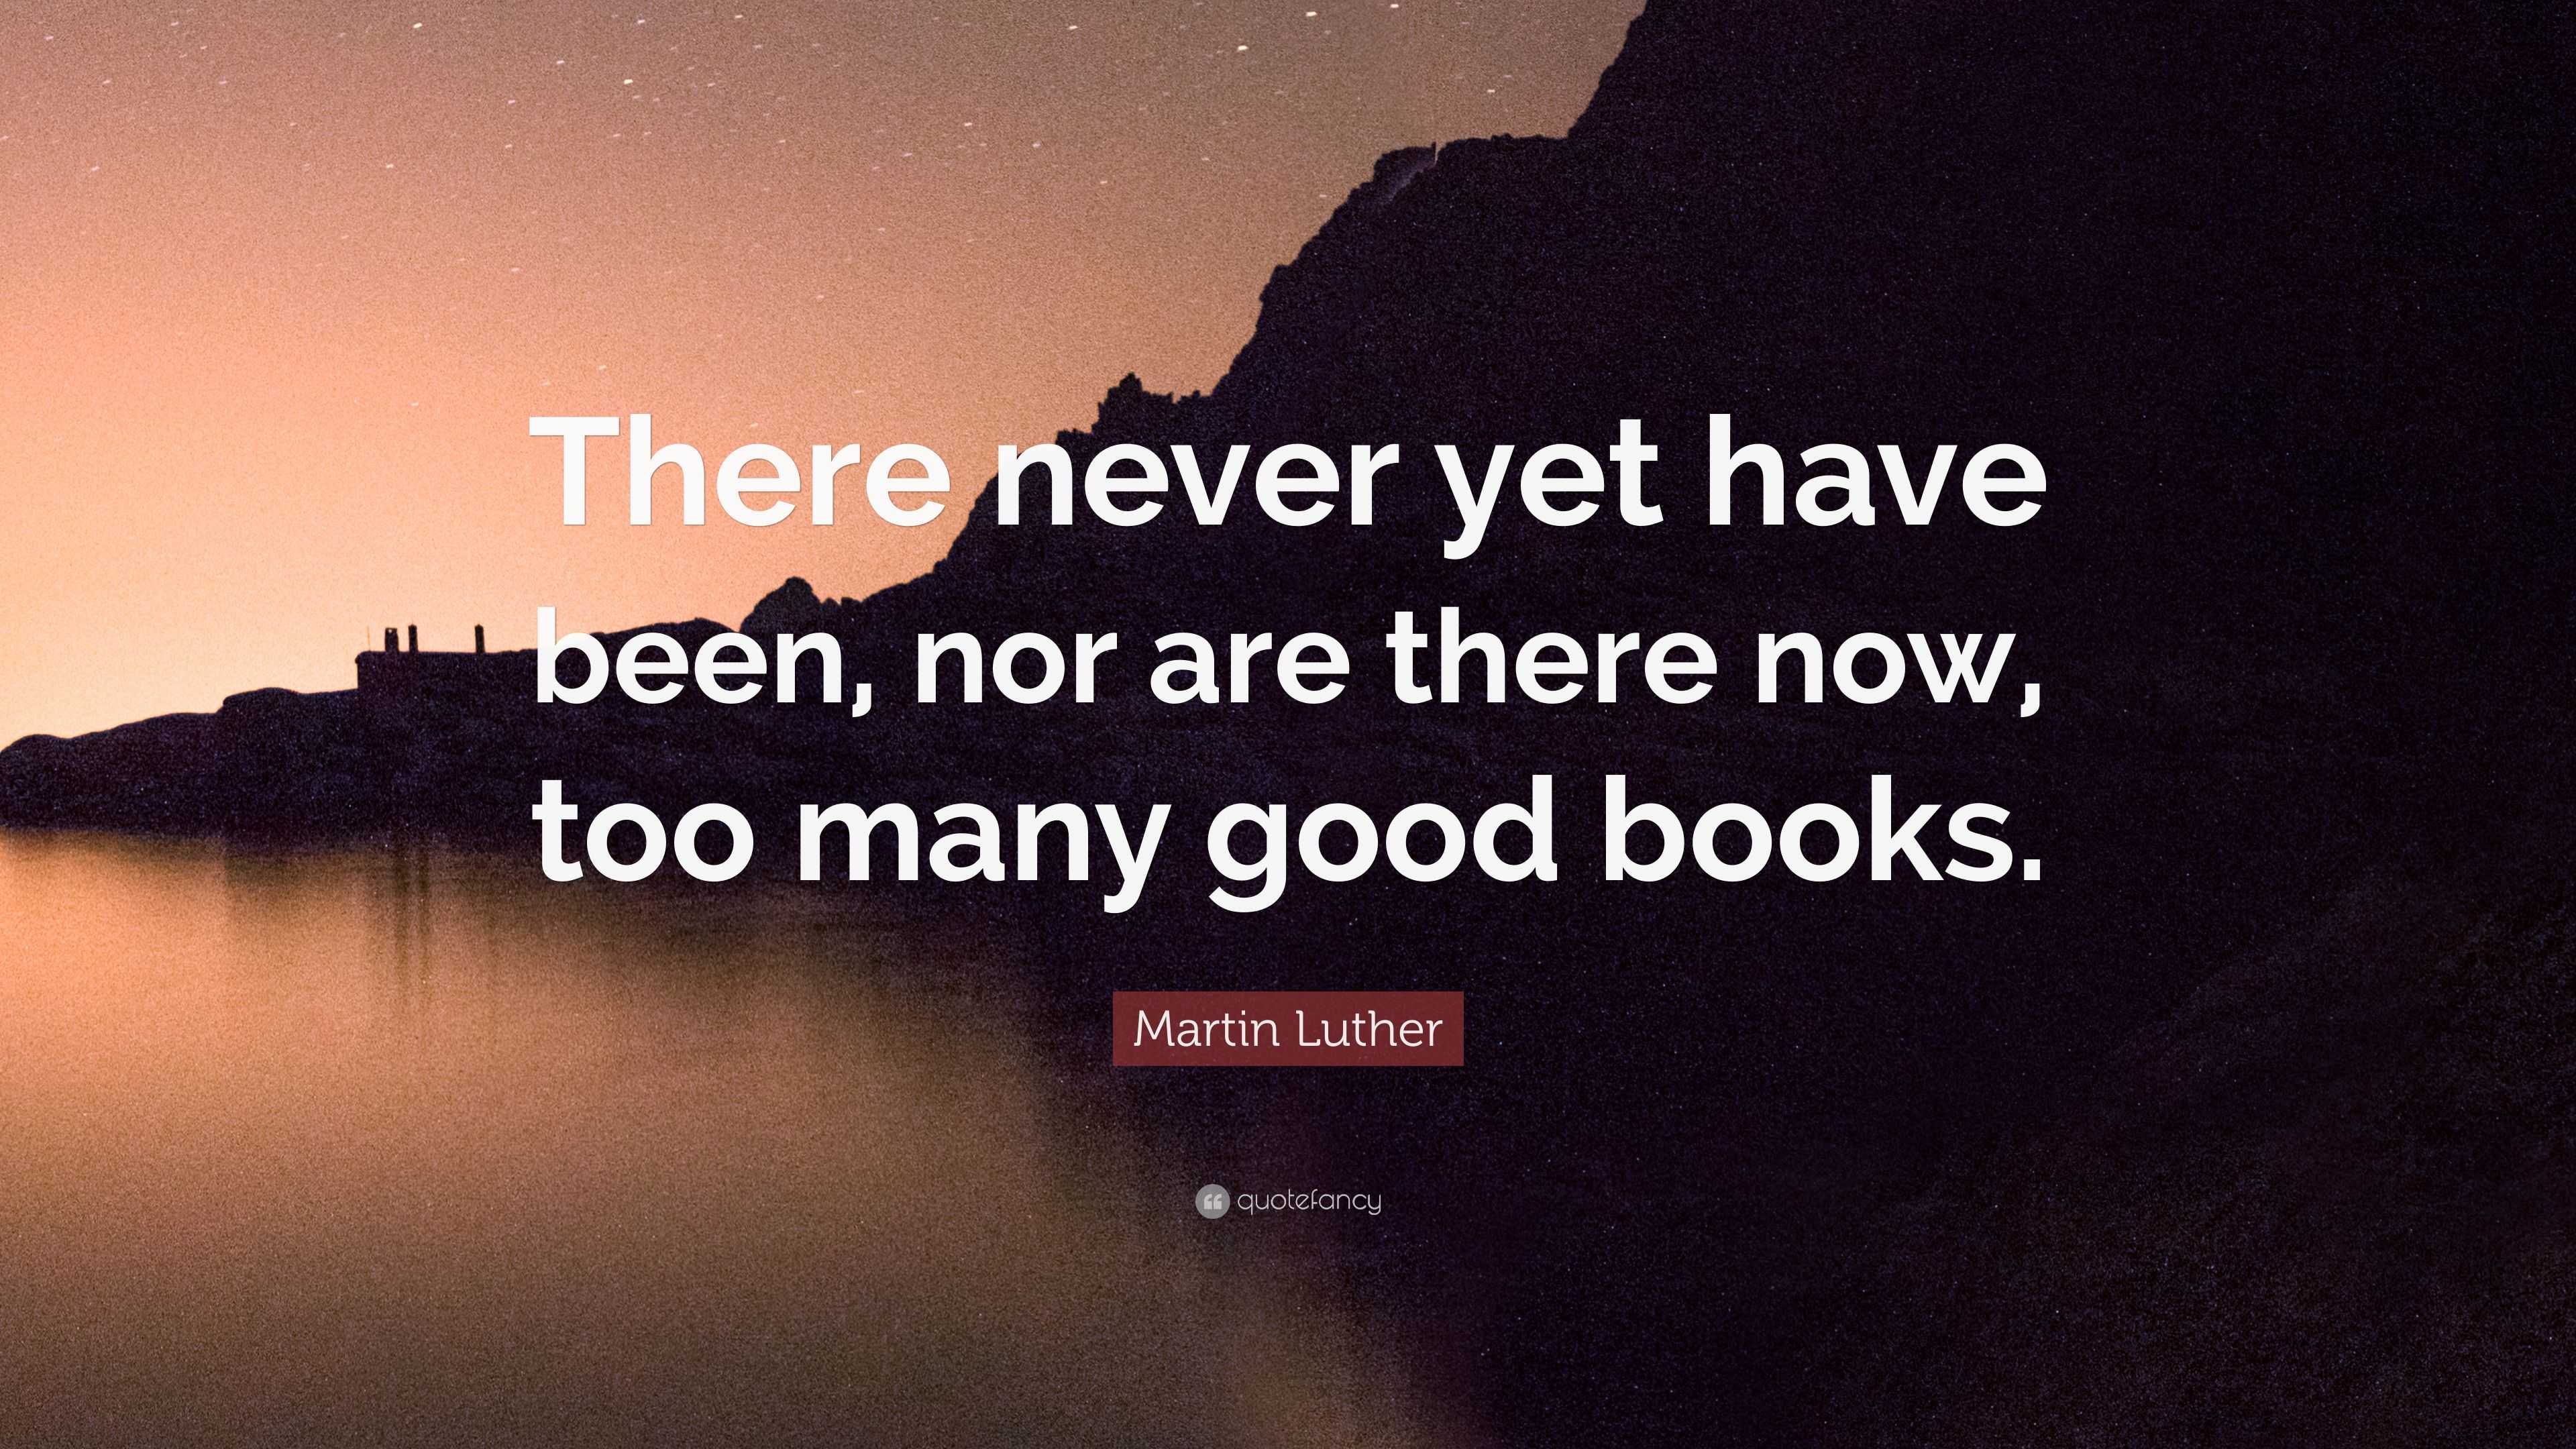 There never yet have been, nor are there now, too many good books. 